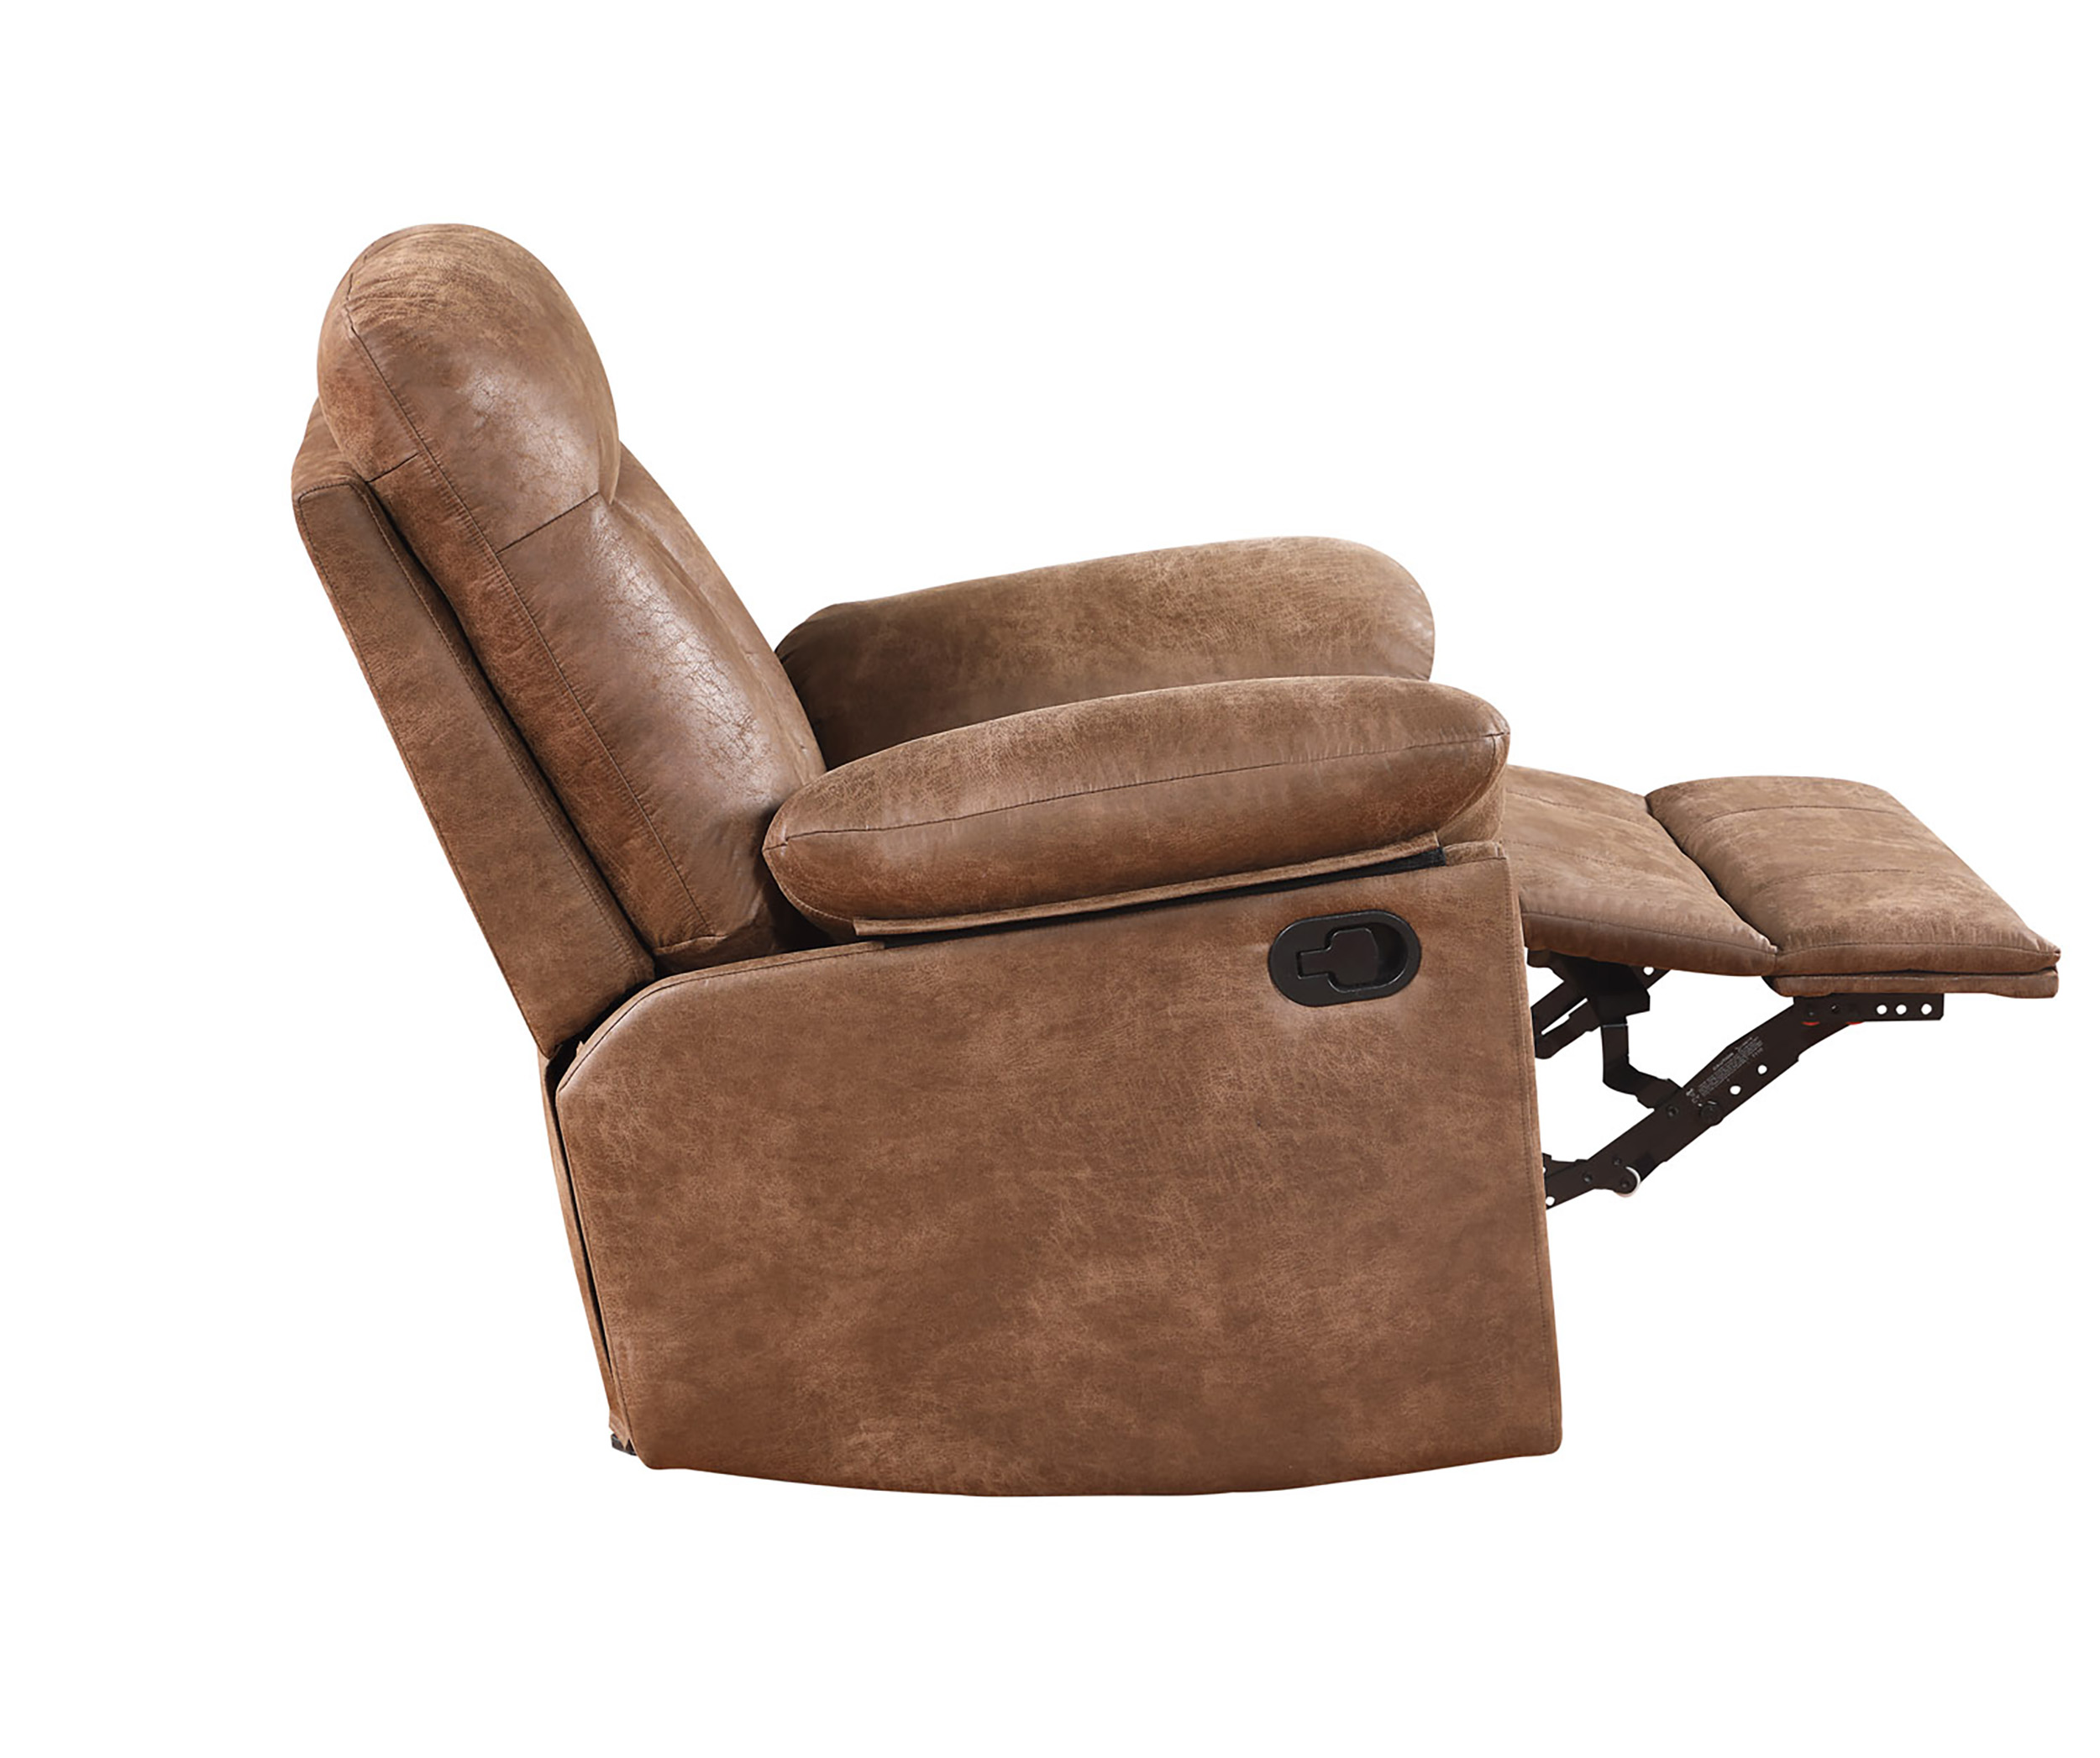 Becket Big and Tall Memory Foam Rocker Recliner W/USB Vintage Brown, Supports up to 500 lbs - image 2 of 10